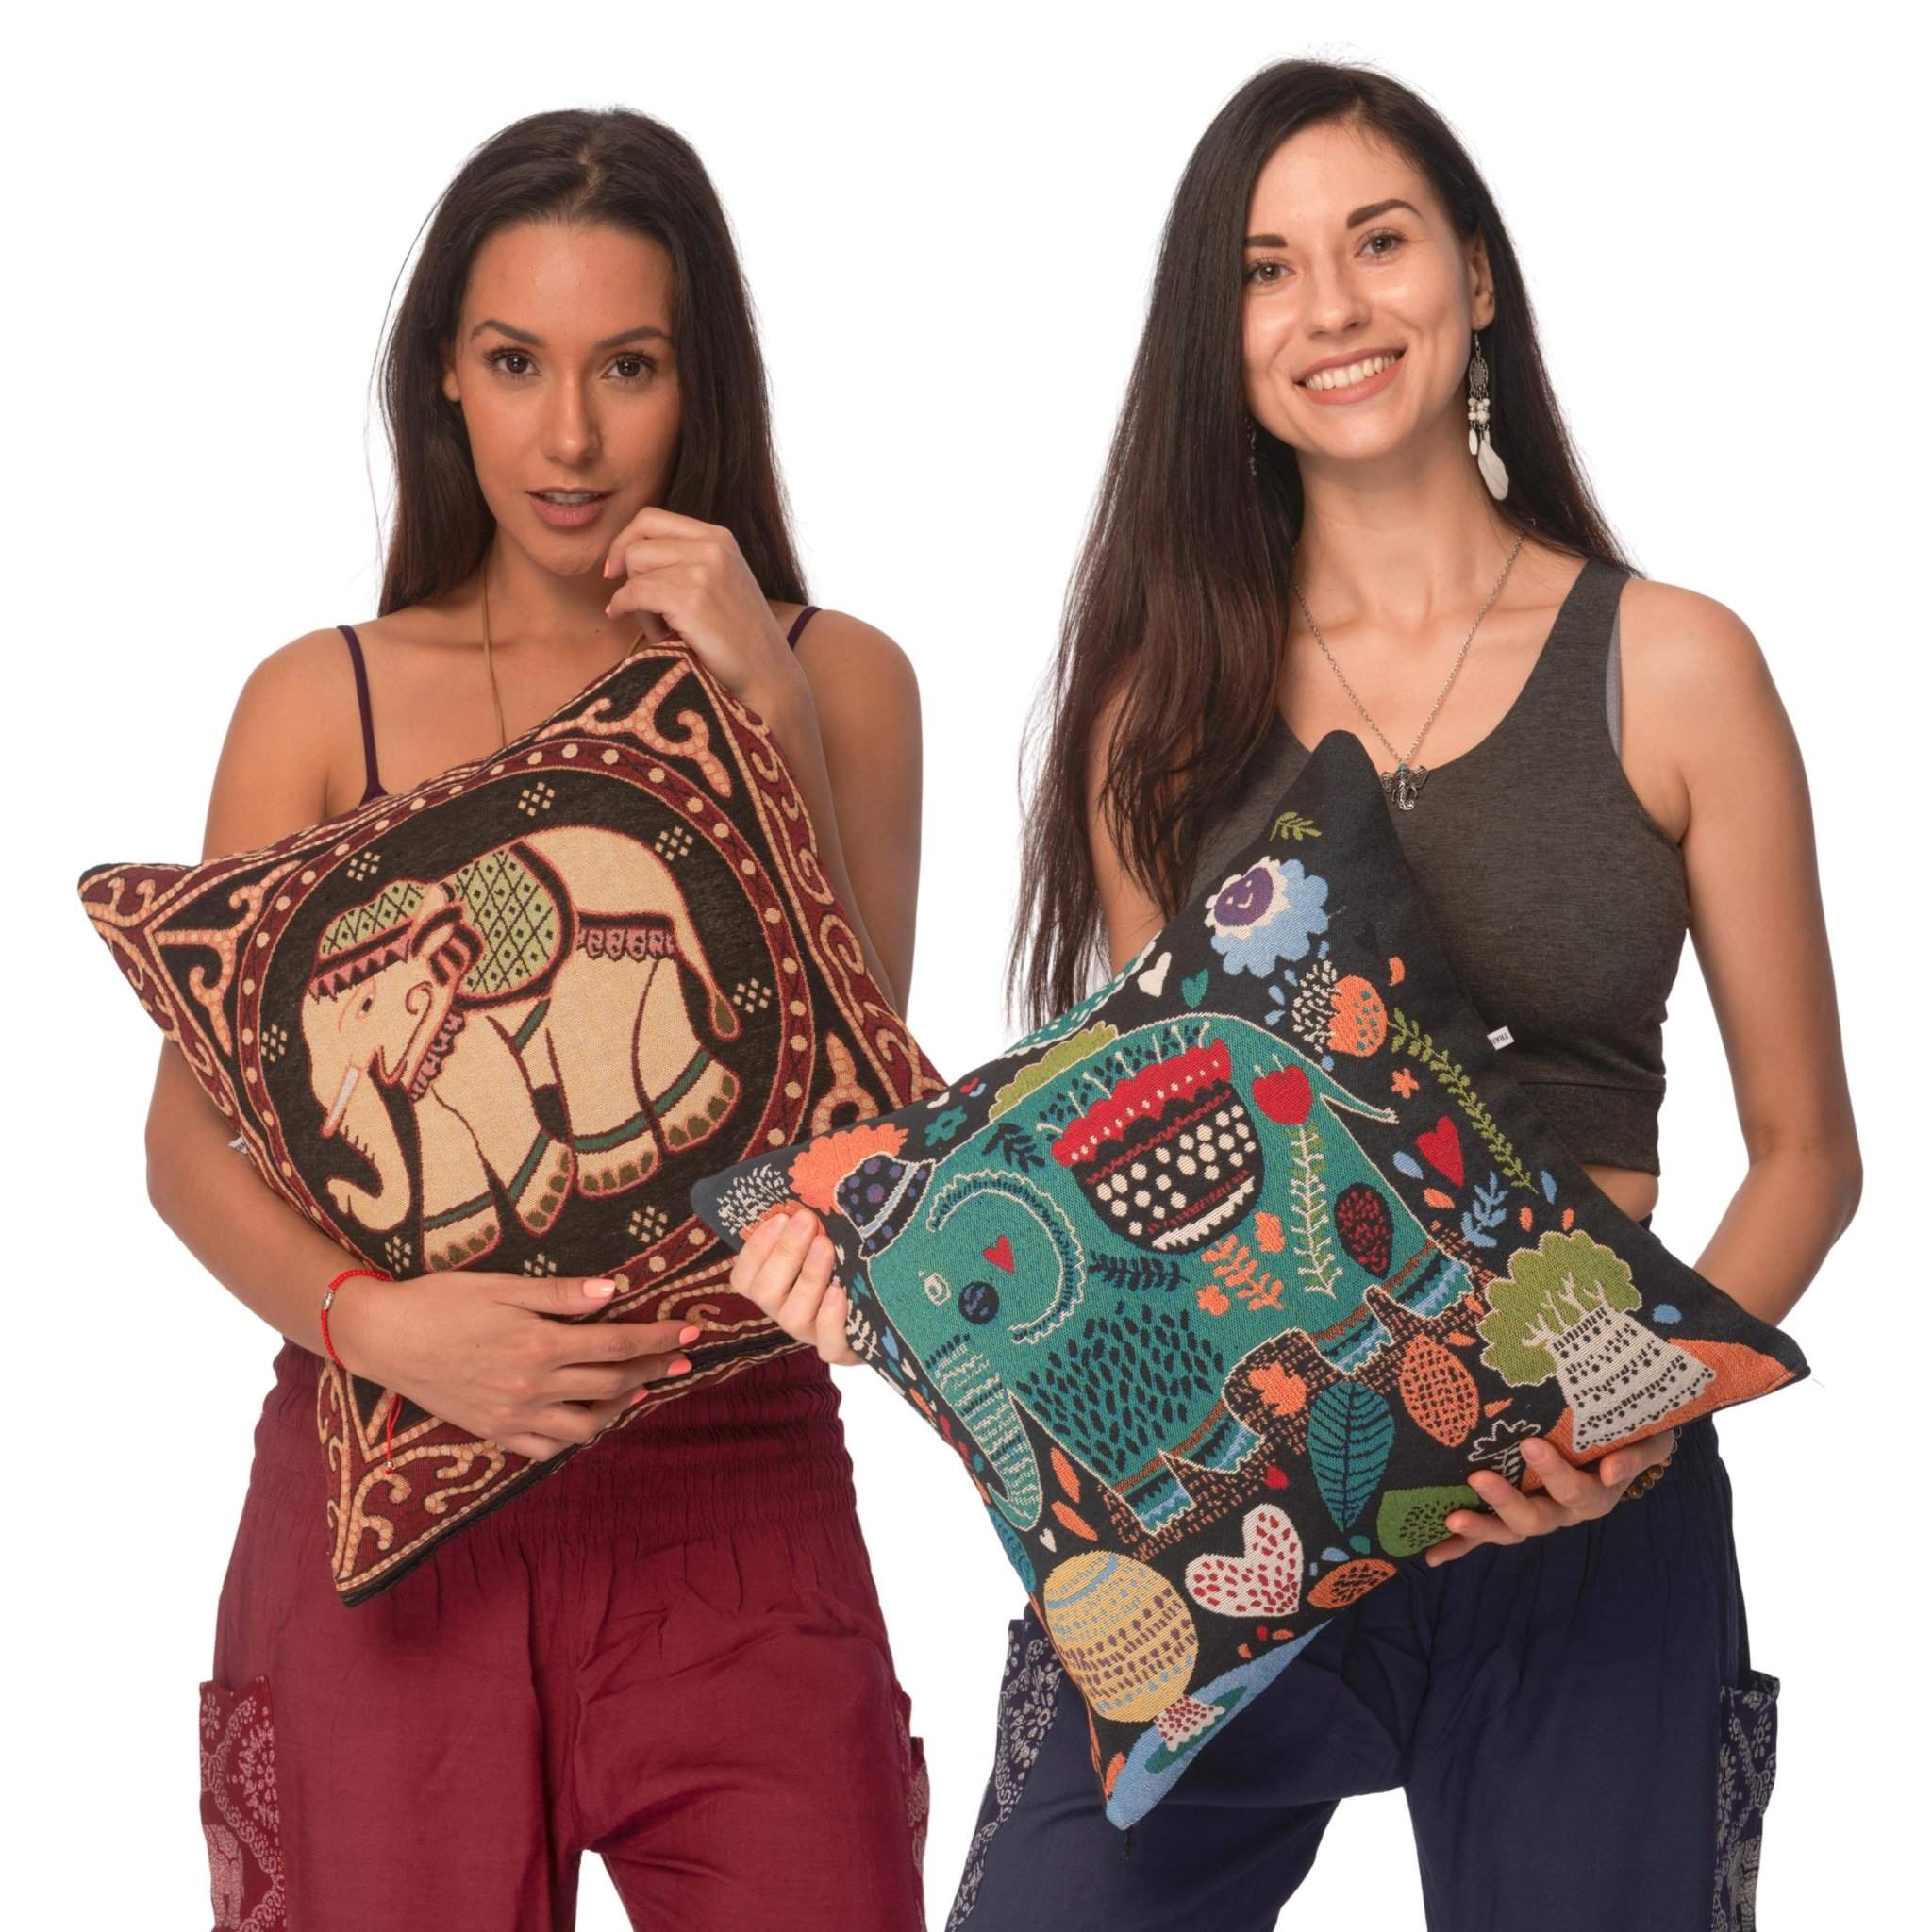 ANGKOR PILLOW COVER Elepanta Pillows - Buy Today Elephant Pants Jewelry And Bohemian Clothes Handmade In Thailand Help To Save The Elephants FairTrade And Vegan